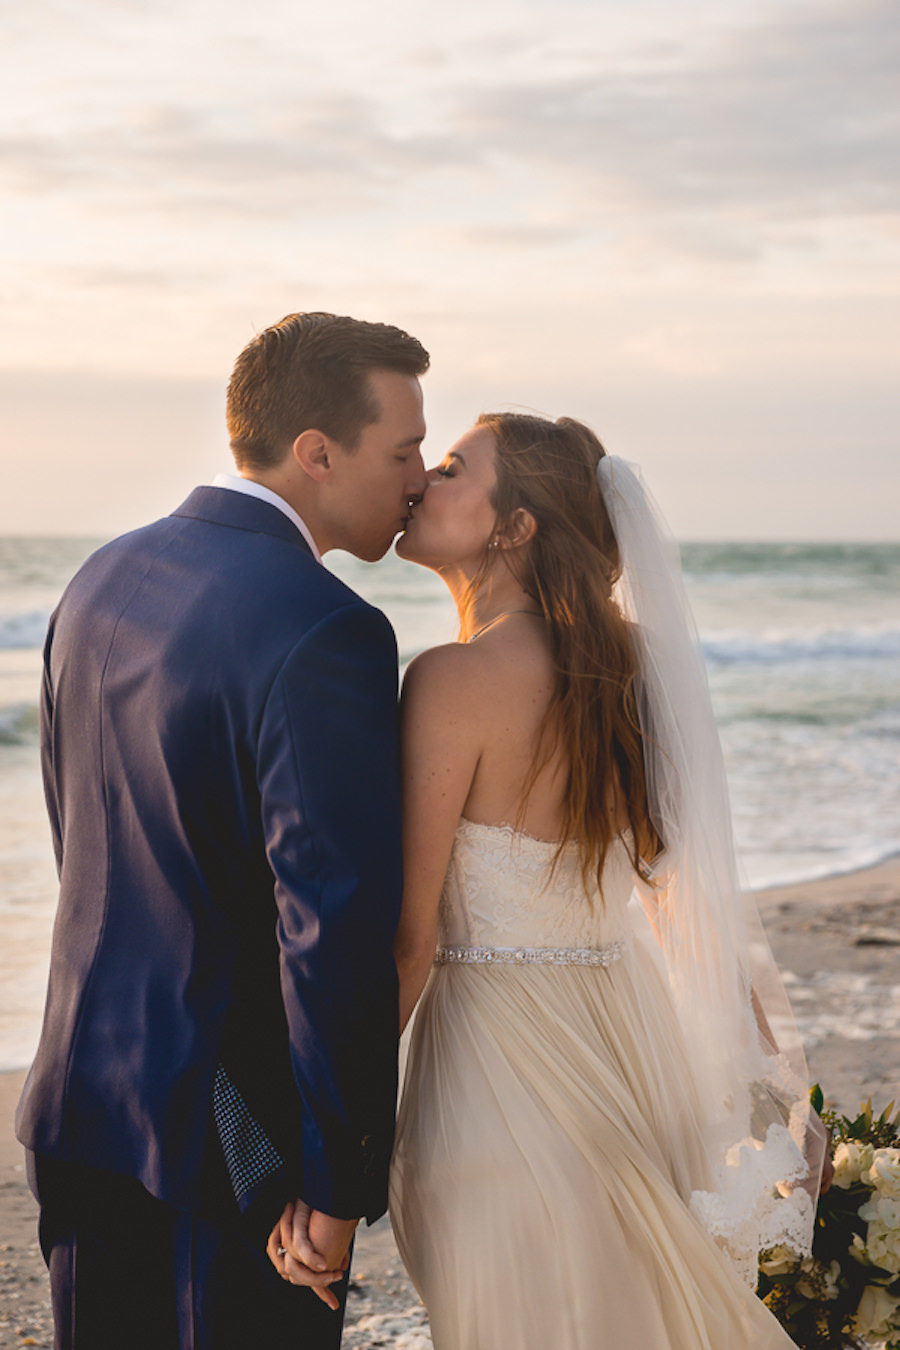 Outdoor, Florida Beach Waterfront Bride and Groom Wedding Portrait | St. Petersburg Wedding Photographer Grind and Press Photography